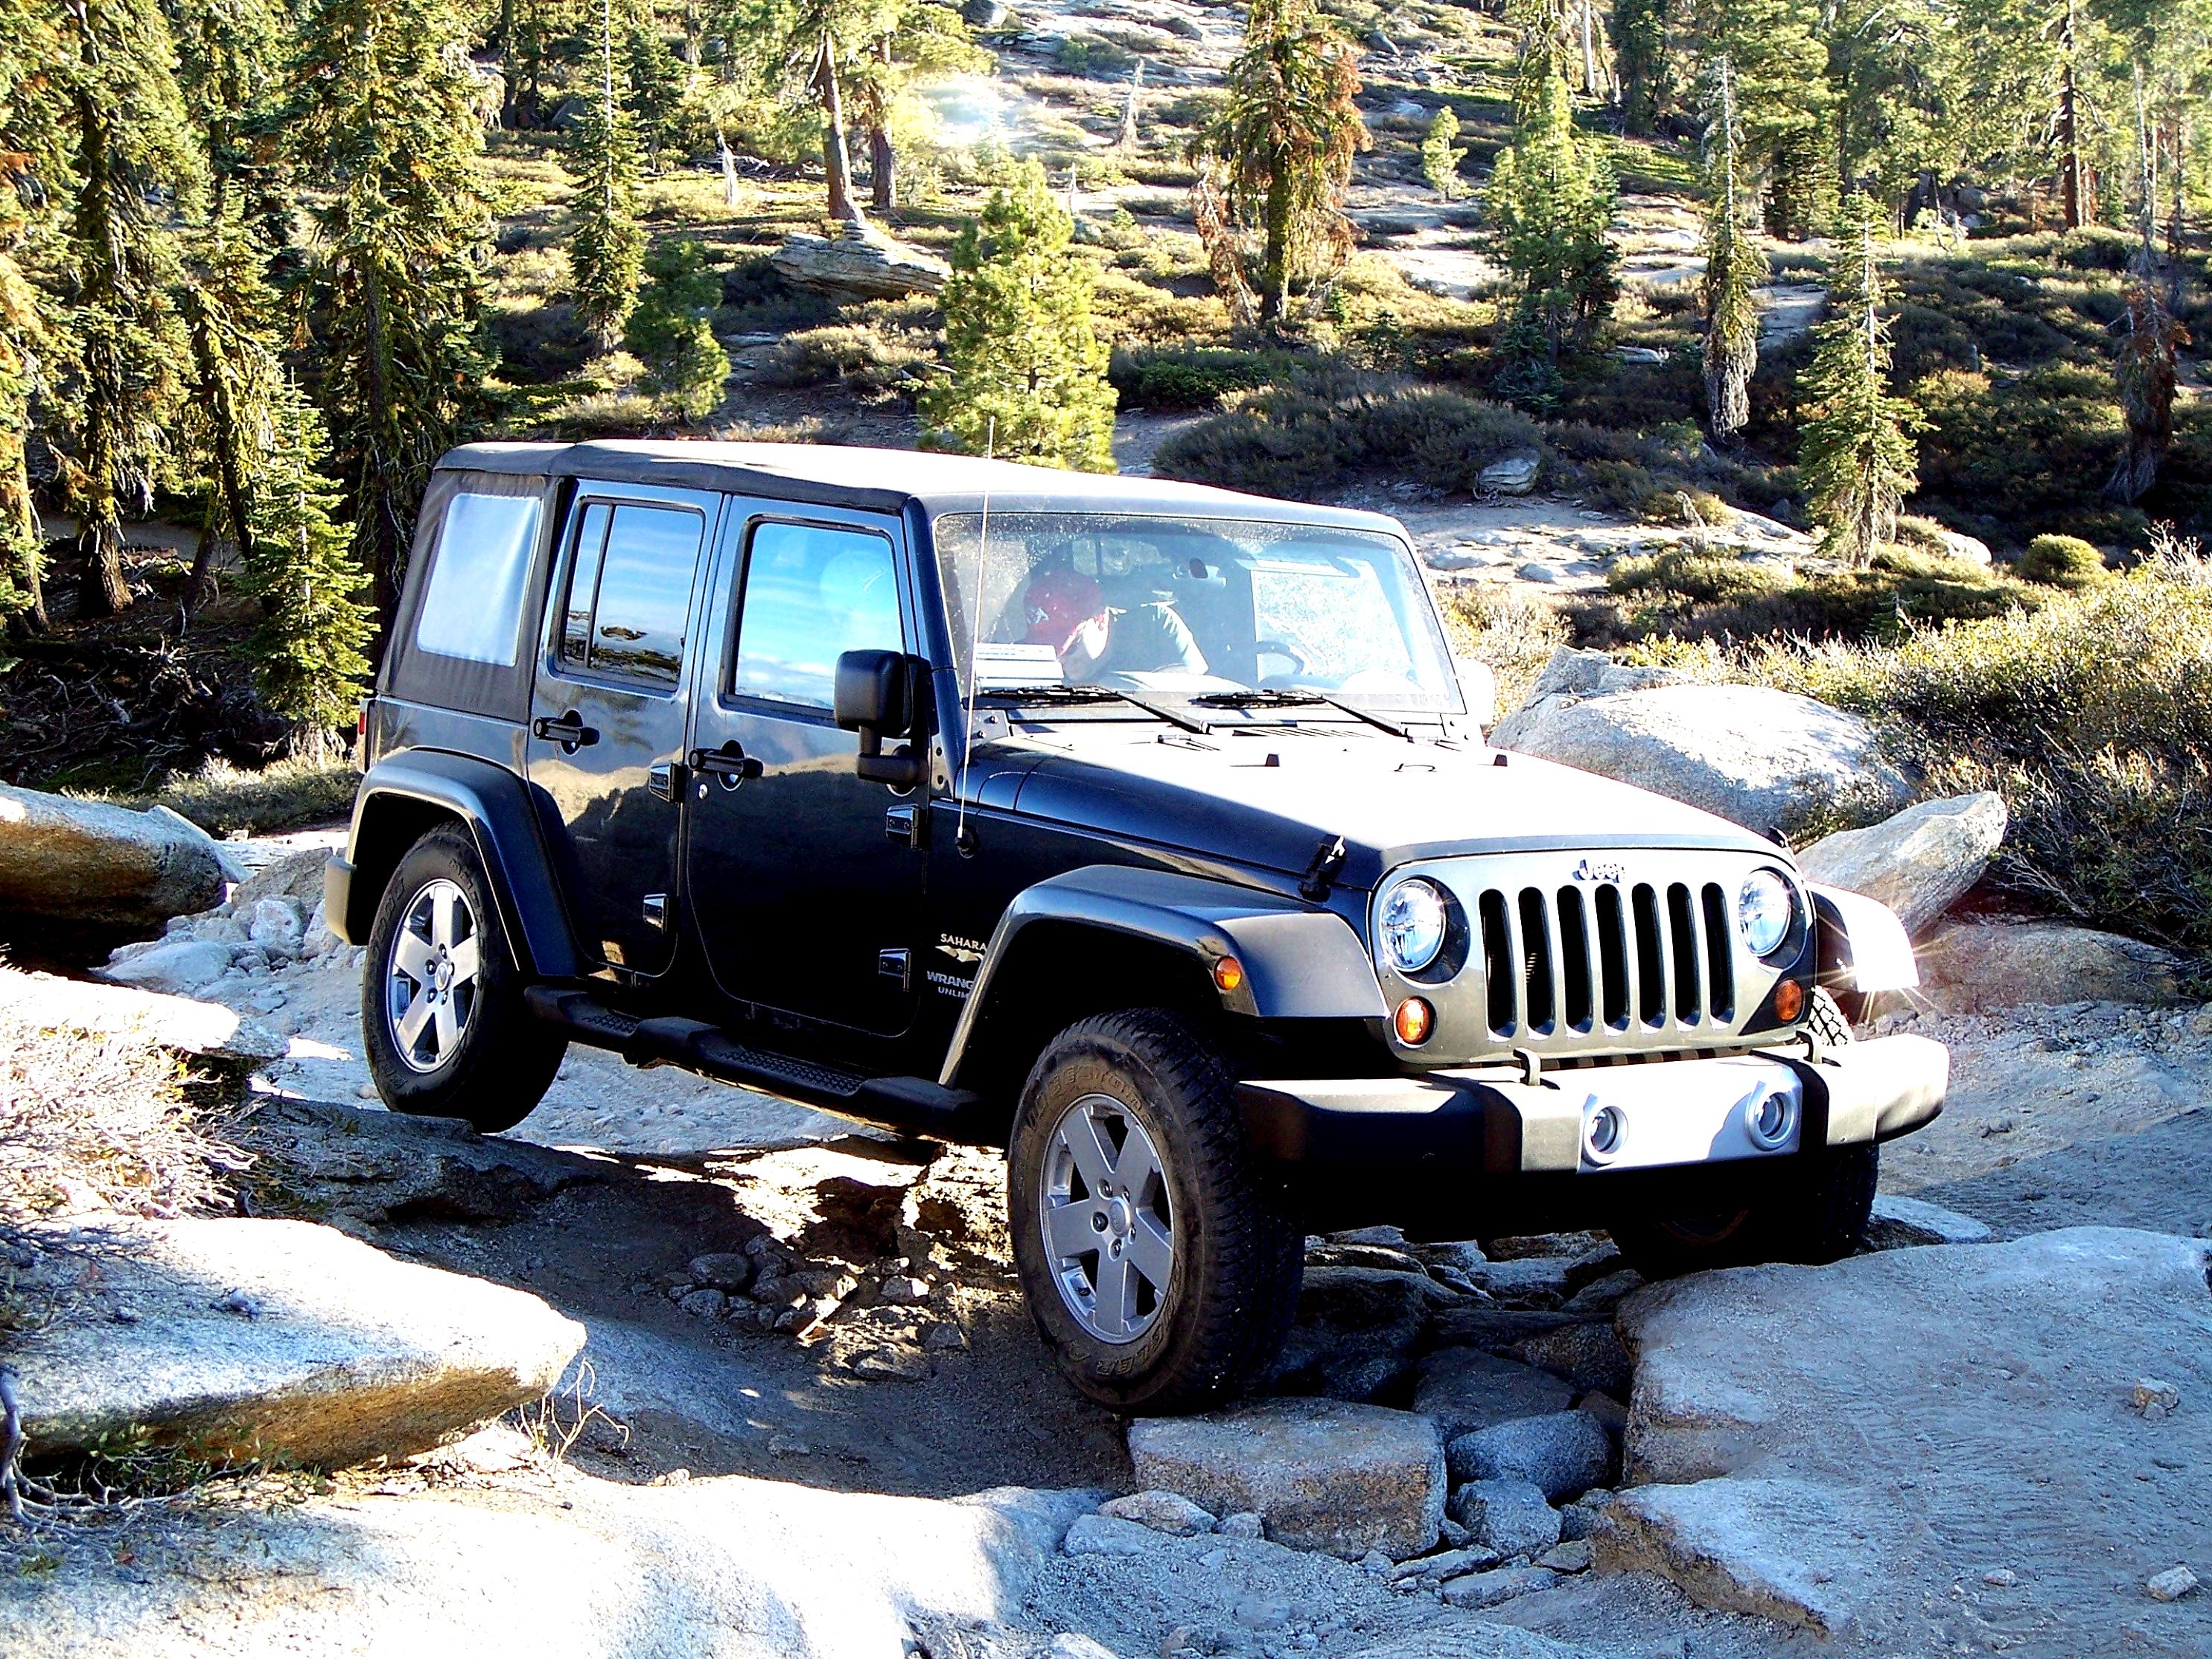 Jeep Wrangler Unlimited 2006 #75